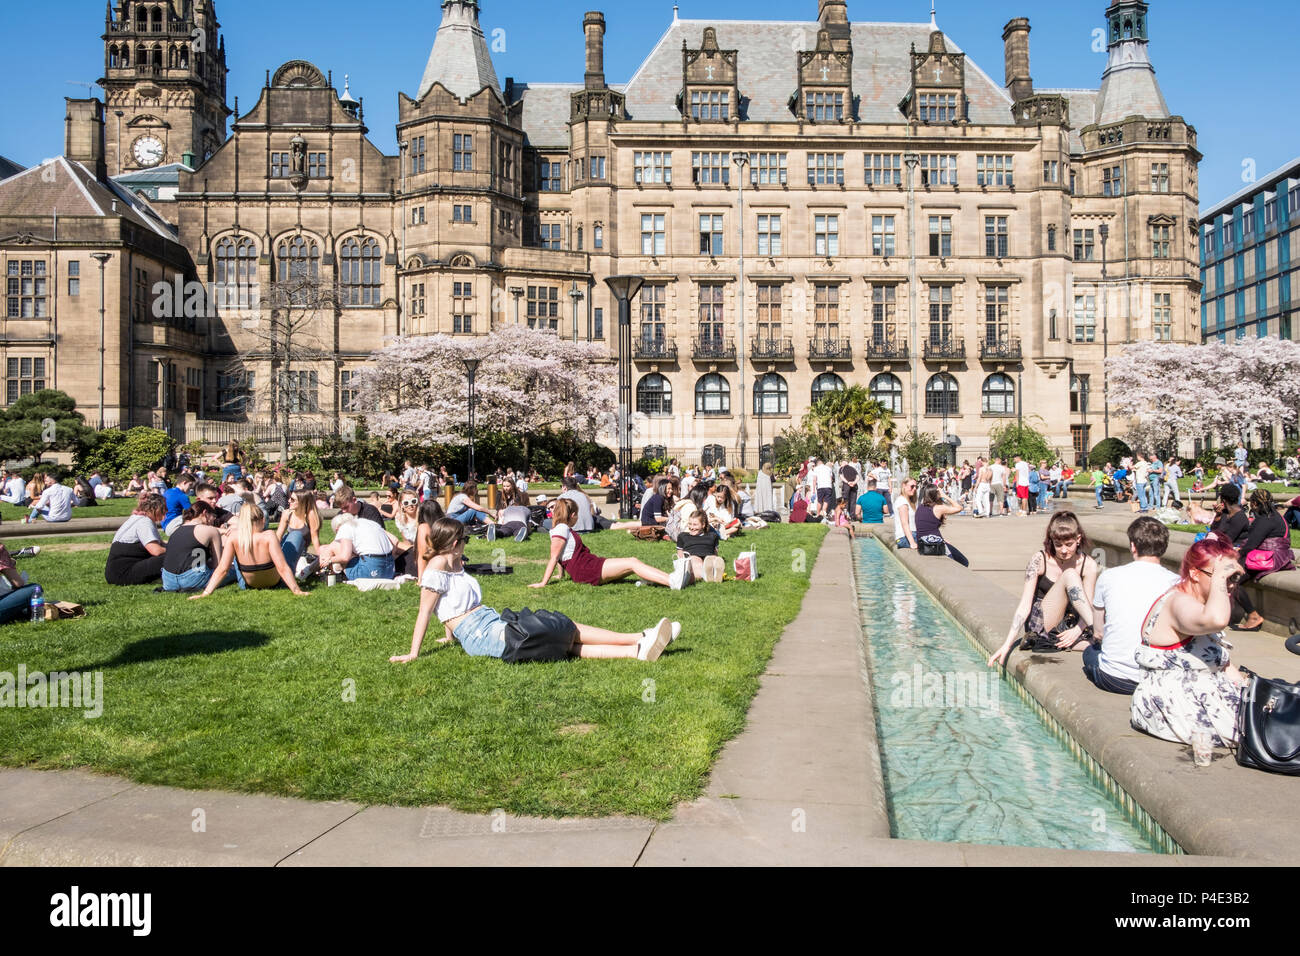 People relaxing and sitting on the grass at the Peace Gardens with the Town Hall in the background, Sheffield city centre, England, UK Stock Photo